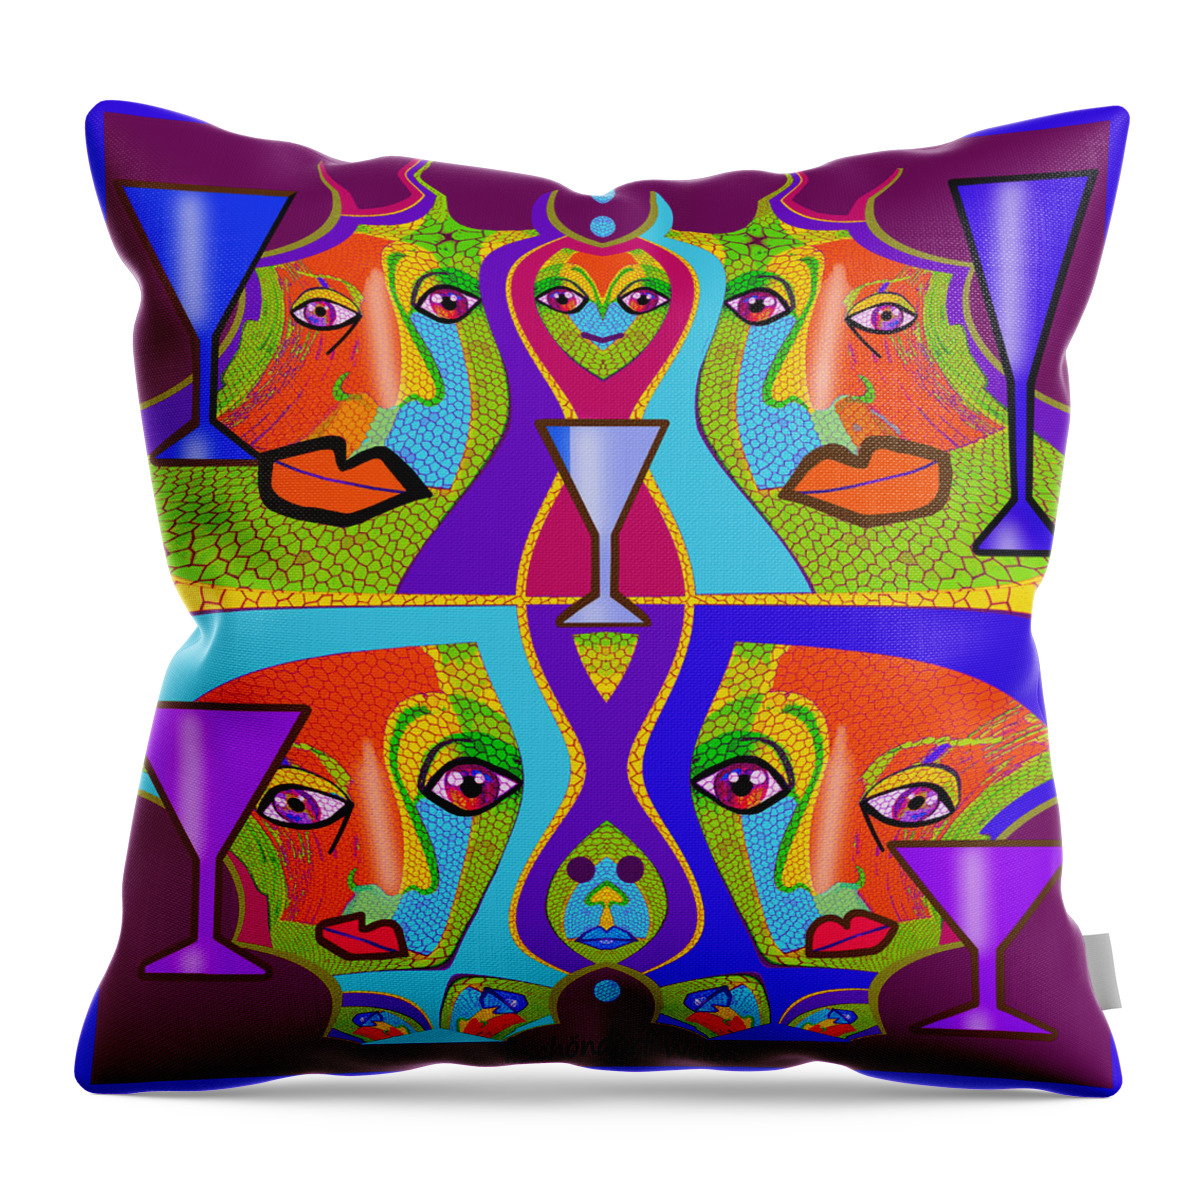 1688 Funny Faces 2017 Throw Pillow featuring the digital art 1688 - Funny Faces 2017 by Irmgard Schoendorf Welch